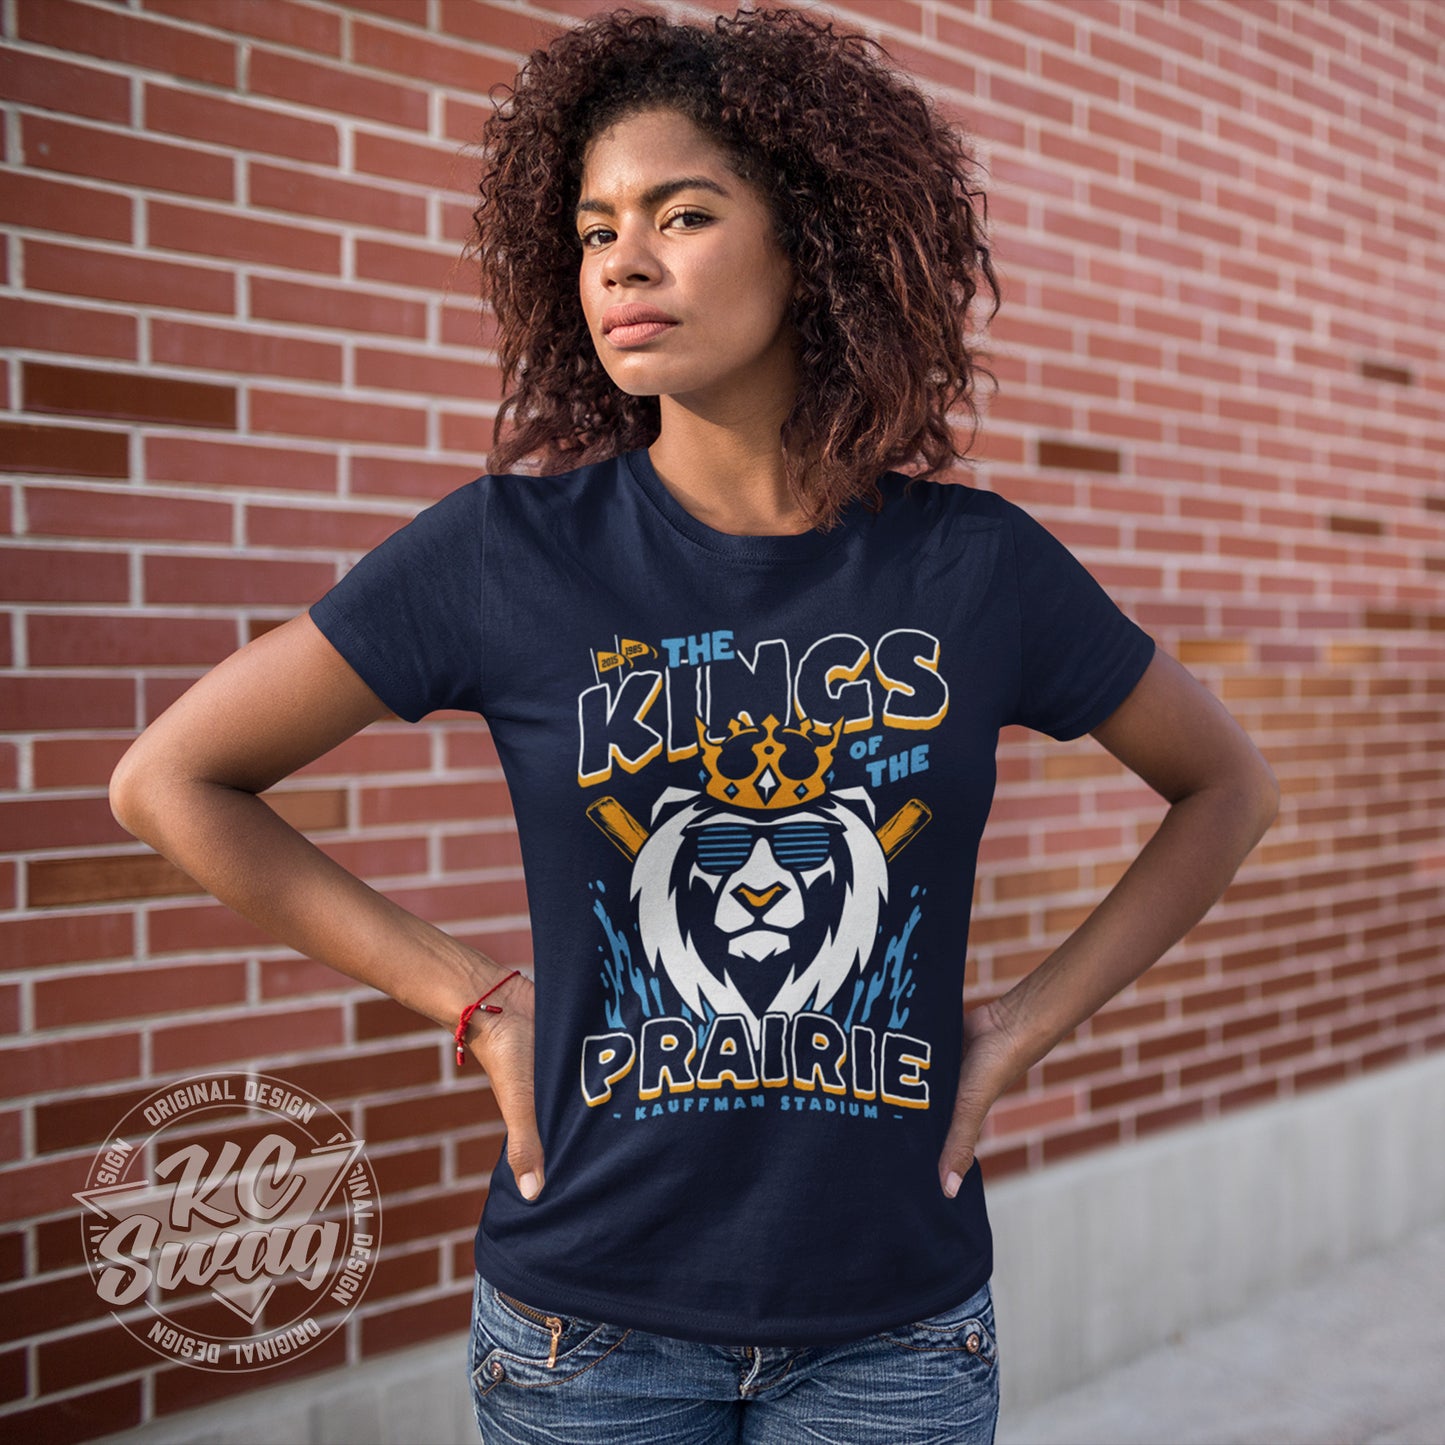 KC Swag - Kansas City Royals, Kings Of The Prairie design on navy blue unisex t-shirt worn by female model with her hands on her hips standing in front of a brick wall